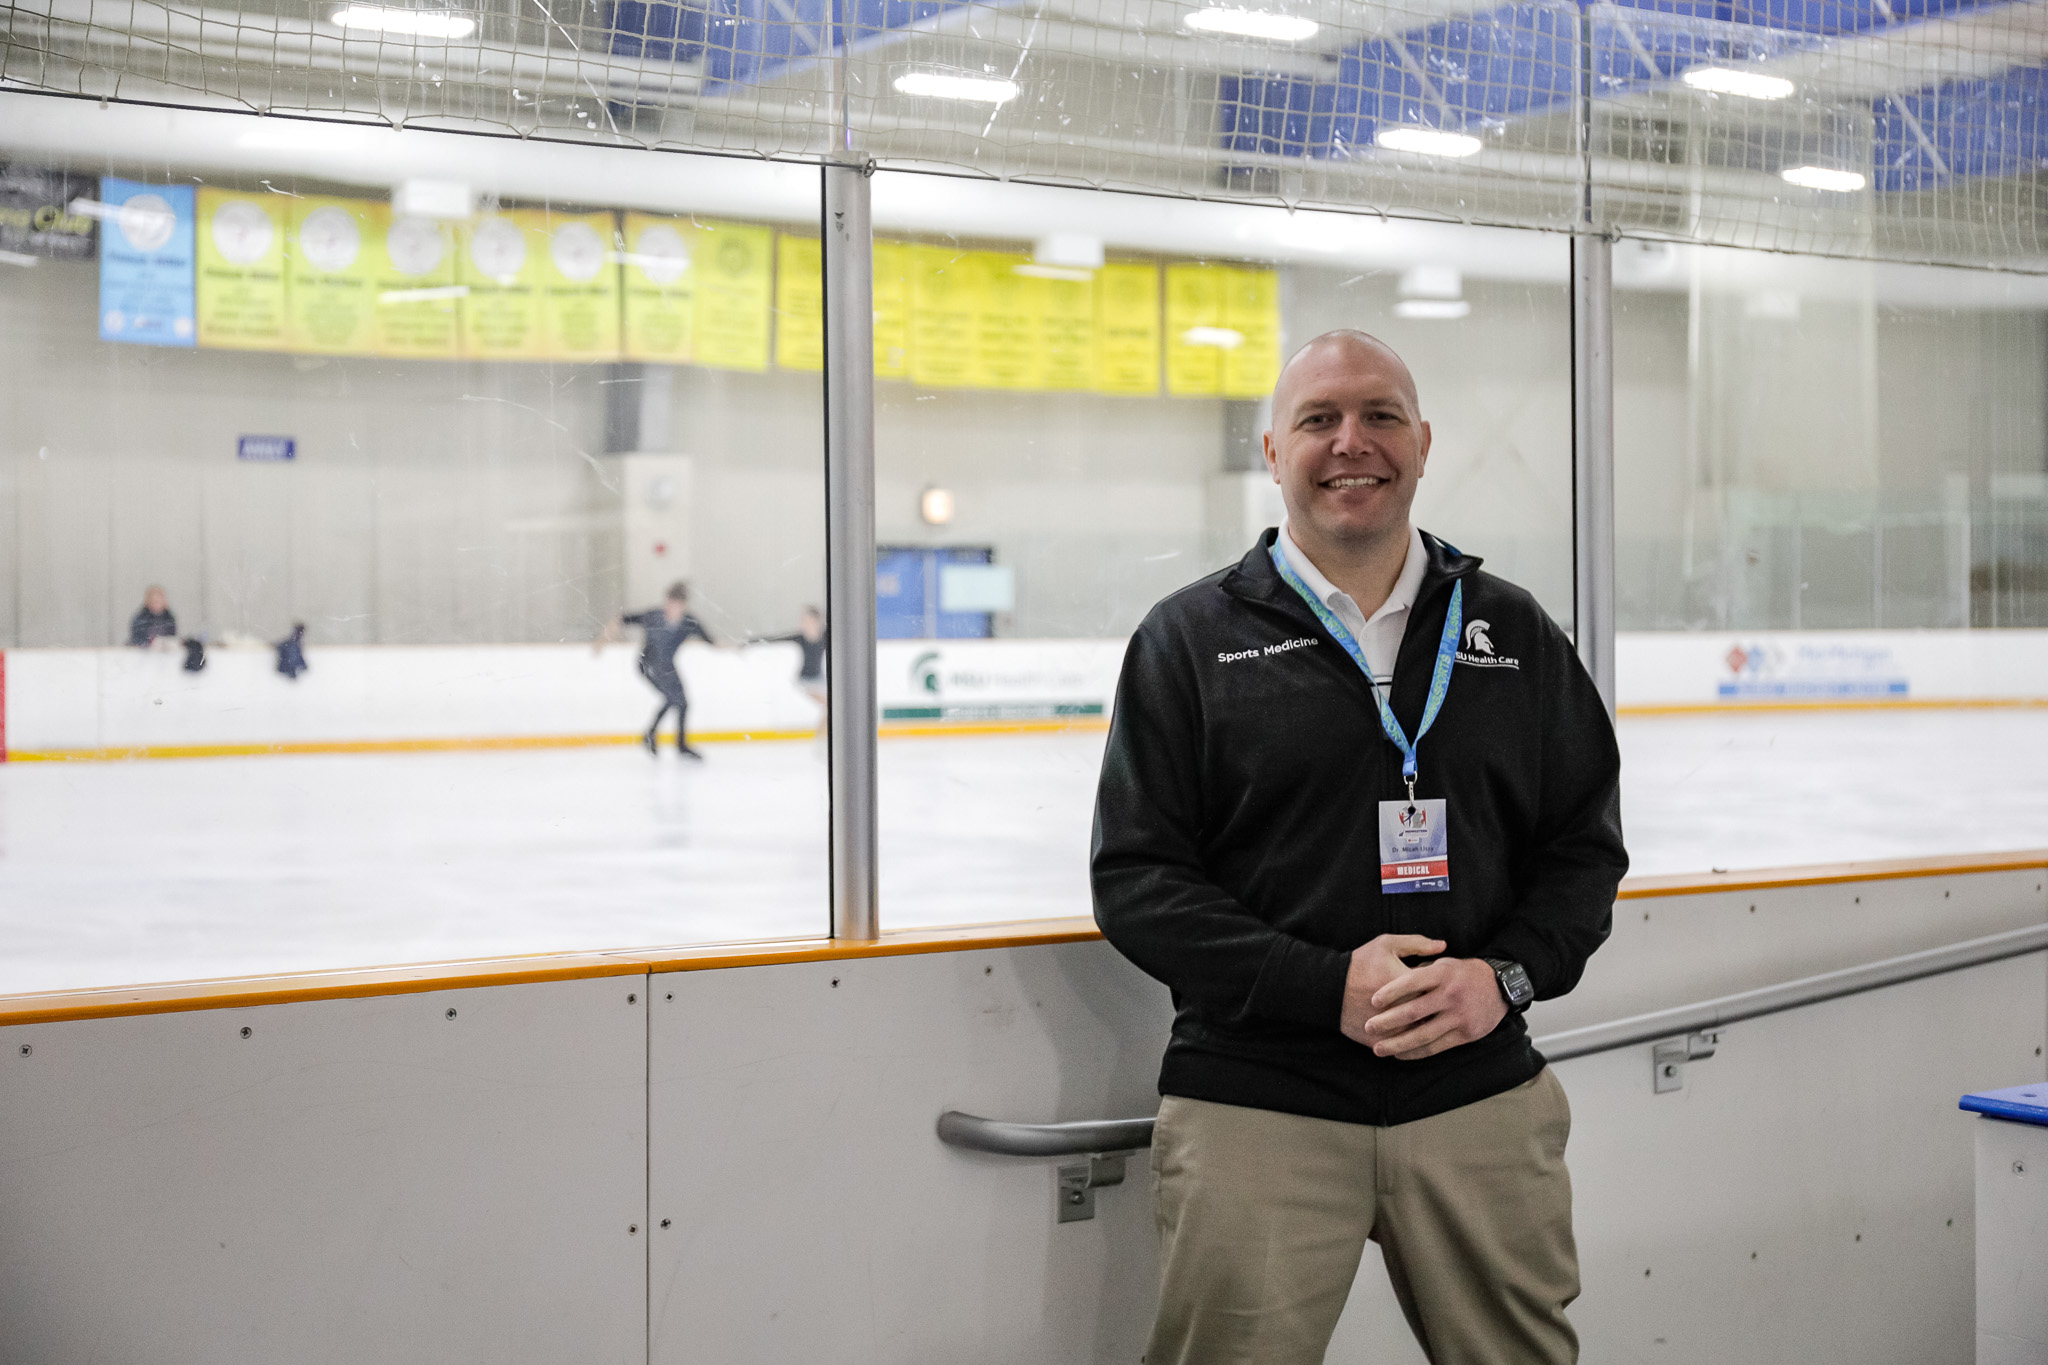 MSU Health Care Sports Medicine Announces Ice Rink Naming Rights Sponsorship with Black Bear Sports Group’s Biggby Coffee Ice Cube - East Lansing